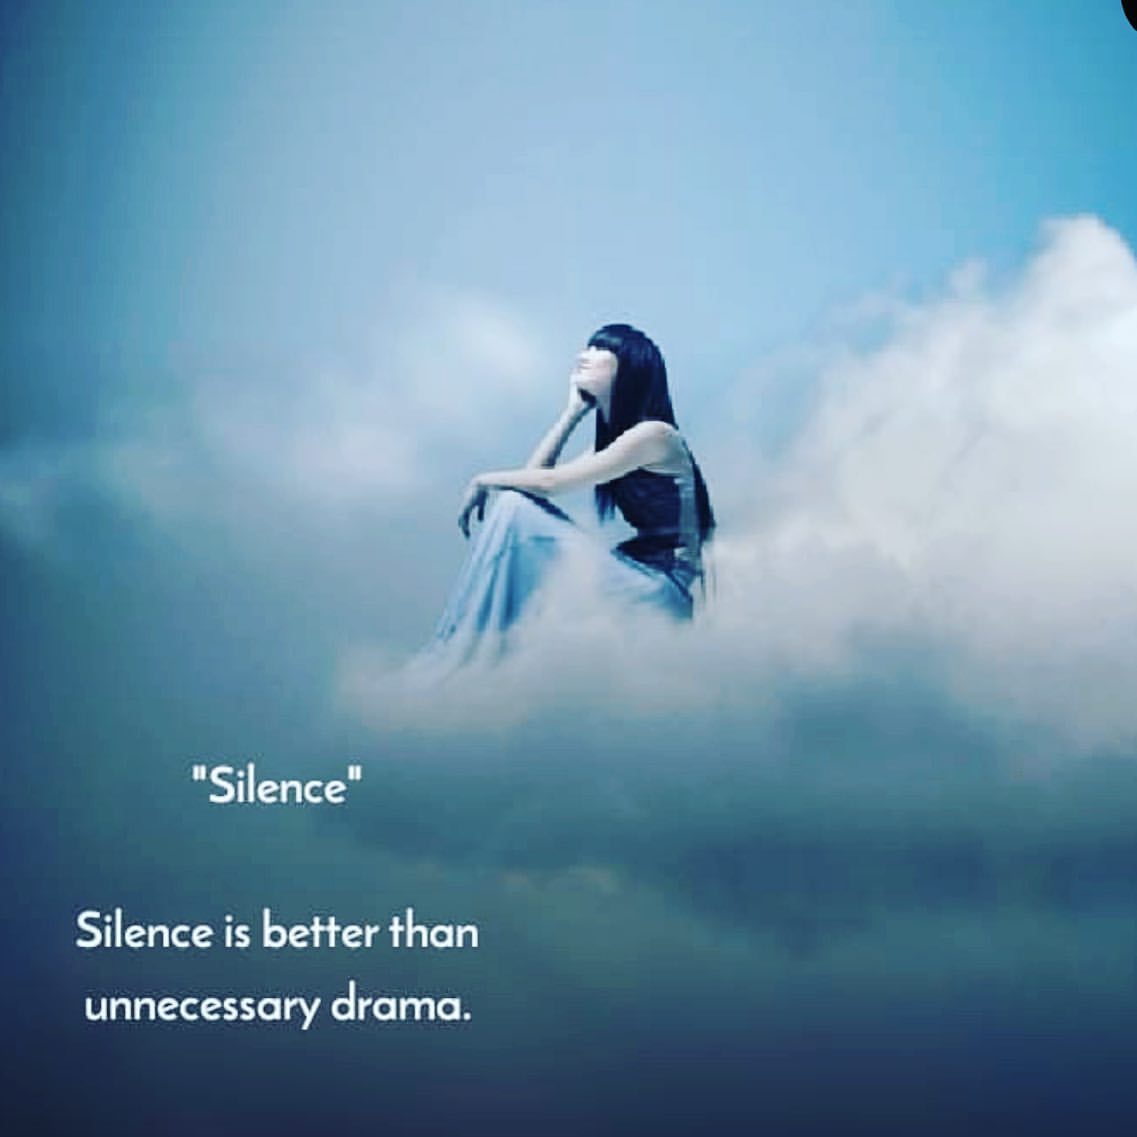 "Silence" Silence is better than unnecessary drama.